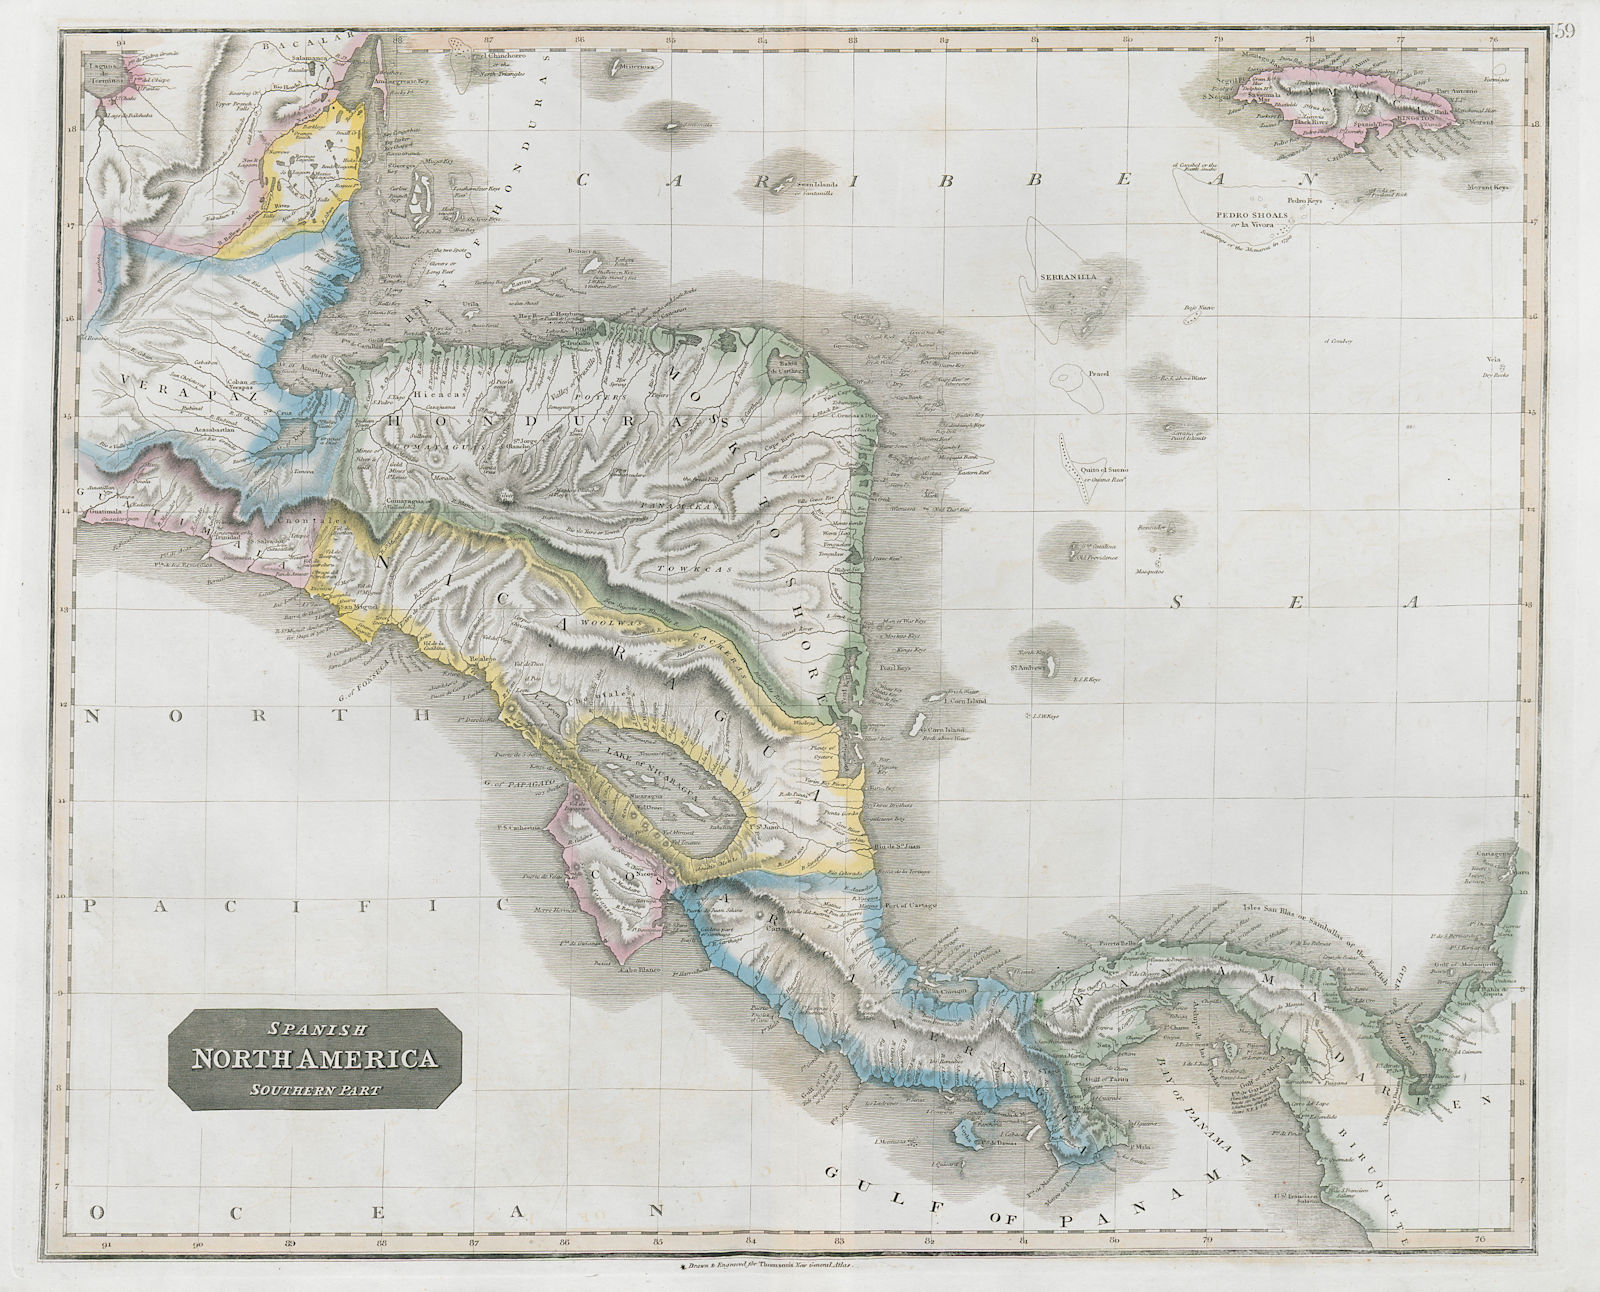 Associate Product "Spanish North America, southern part" by John Thomson. Central America 1830 map